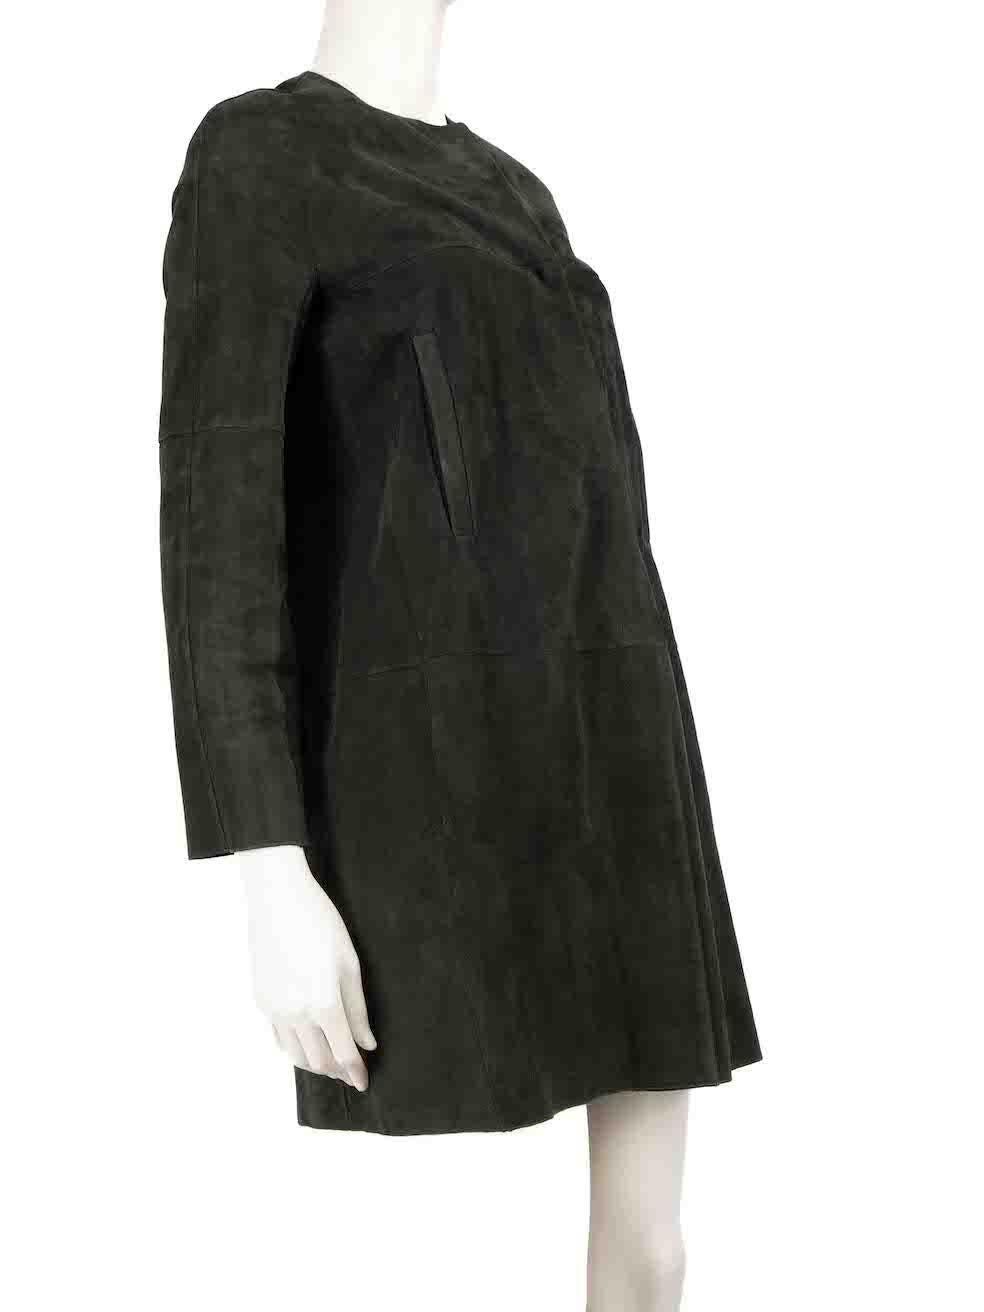 CONDITION is Very good. Minimal wear to the coat is evident. Minimal wear to the front is seen with abrasion marks on the piping in between the button closures, above the hemline and some on the sleeves on this used S' Max Mara designer resale